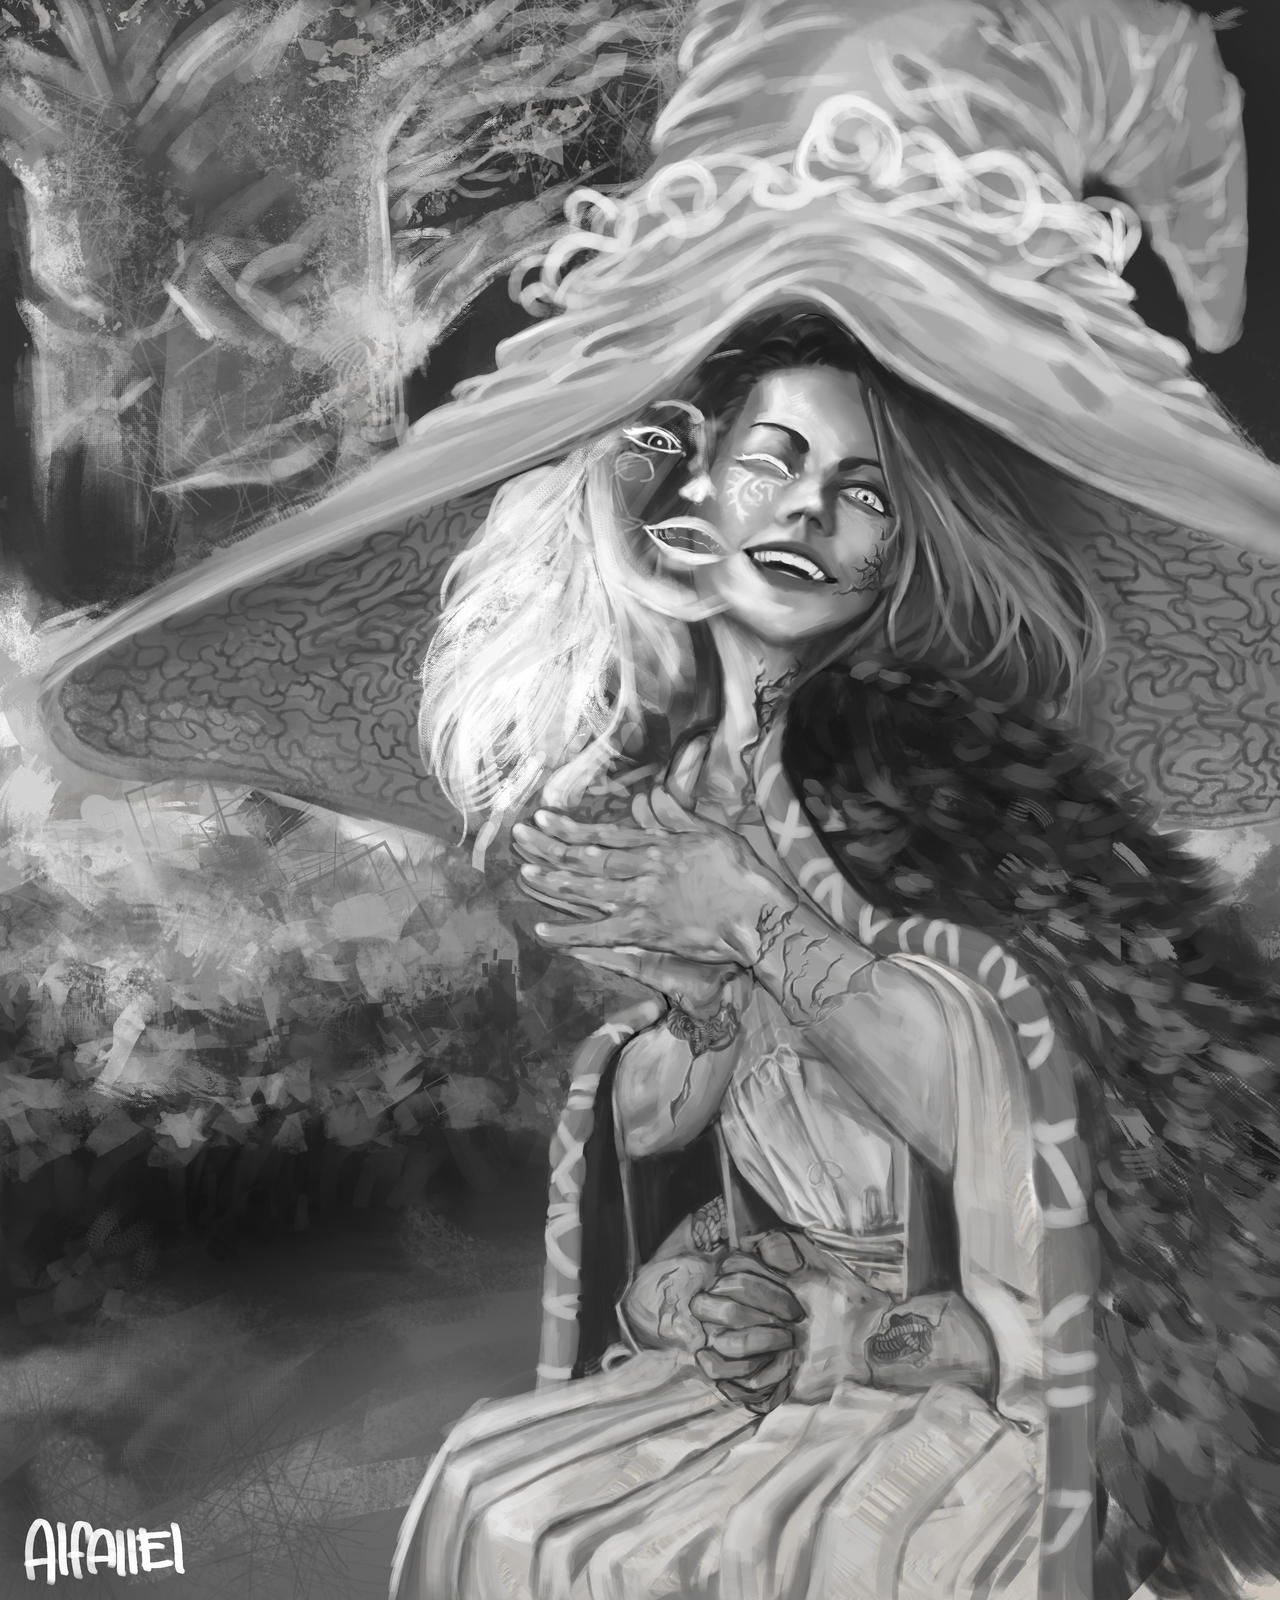 Fanart Friday: Ranni the Witch – Beneath the Tangles